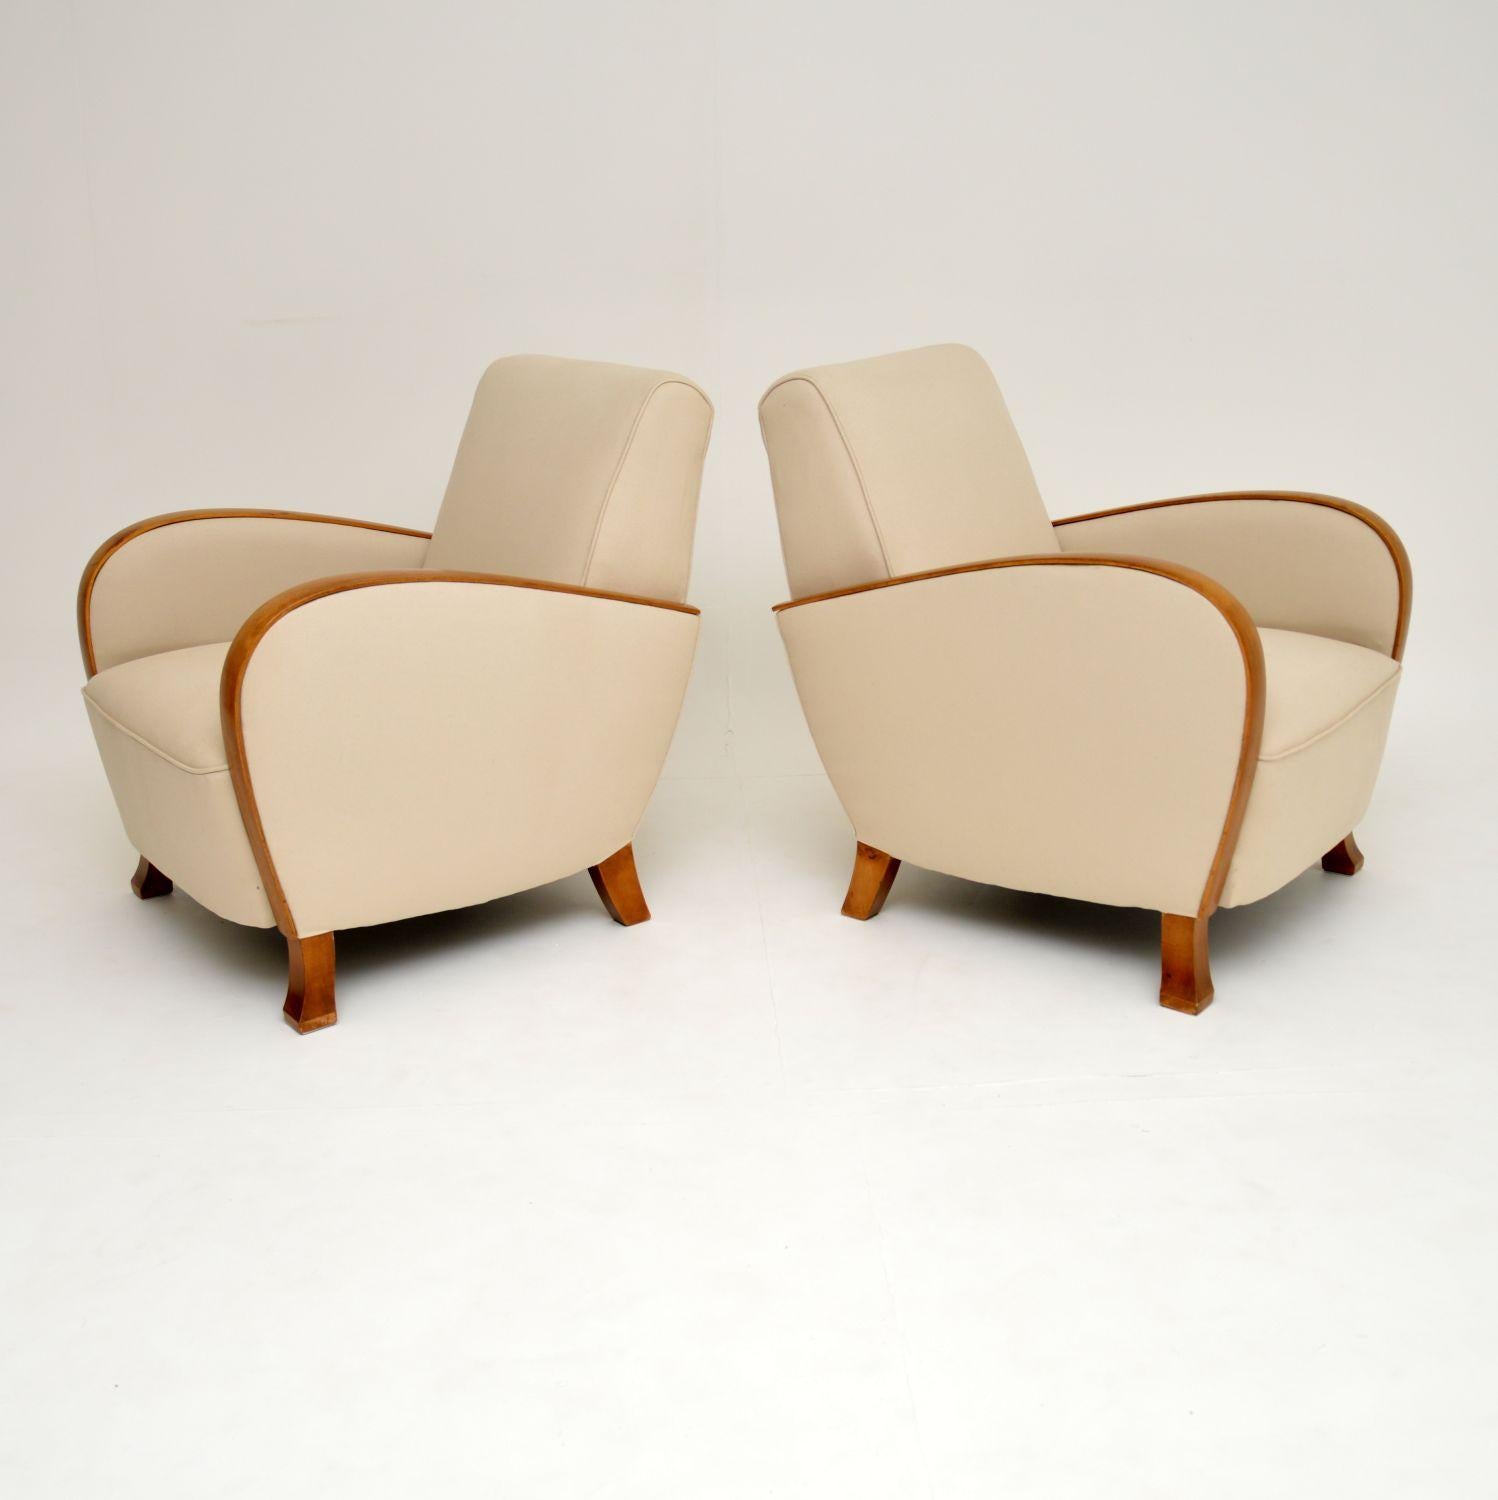 A very stylish pair of original Art Deco period armchairs. These were made in Sweden, they date from the 1930s period.

They are beautifully made with satin birch arms and legs, they are of wonderful quality and are very comfortable with fully